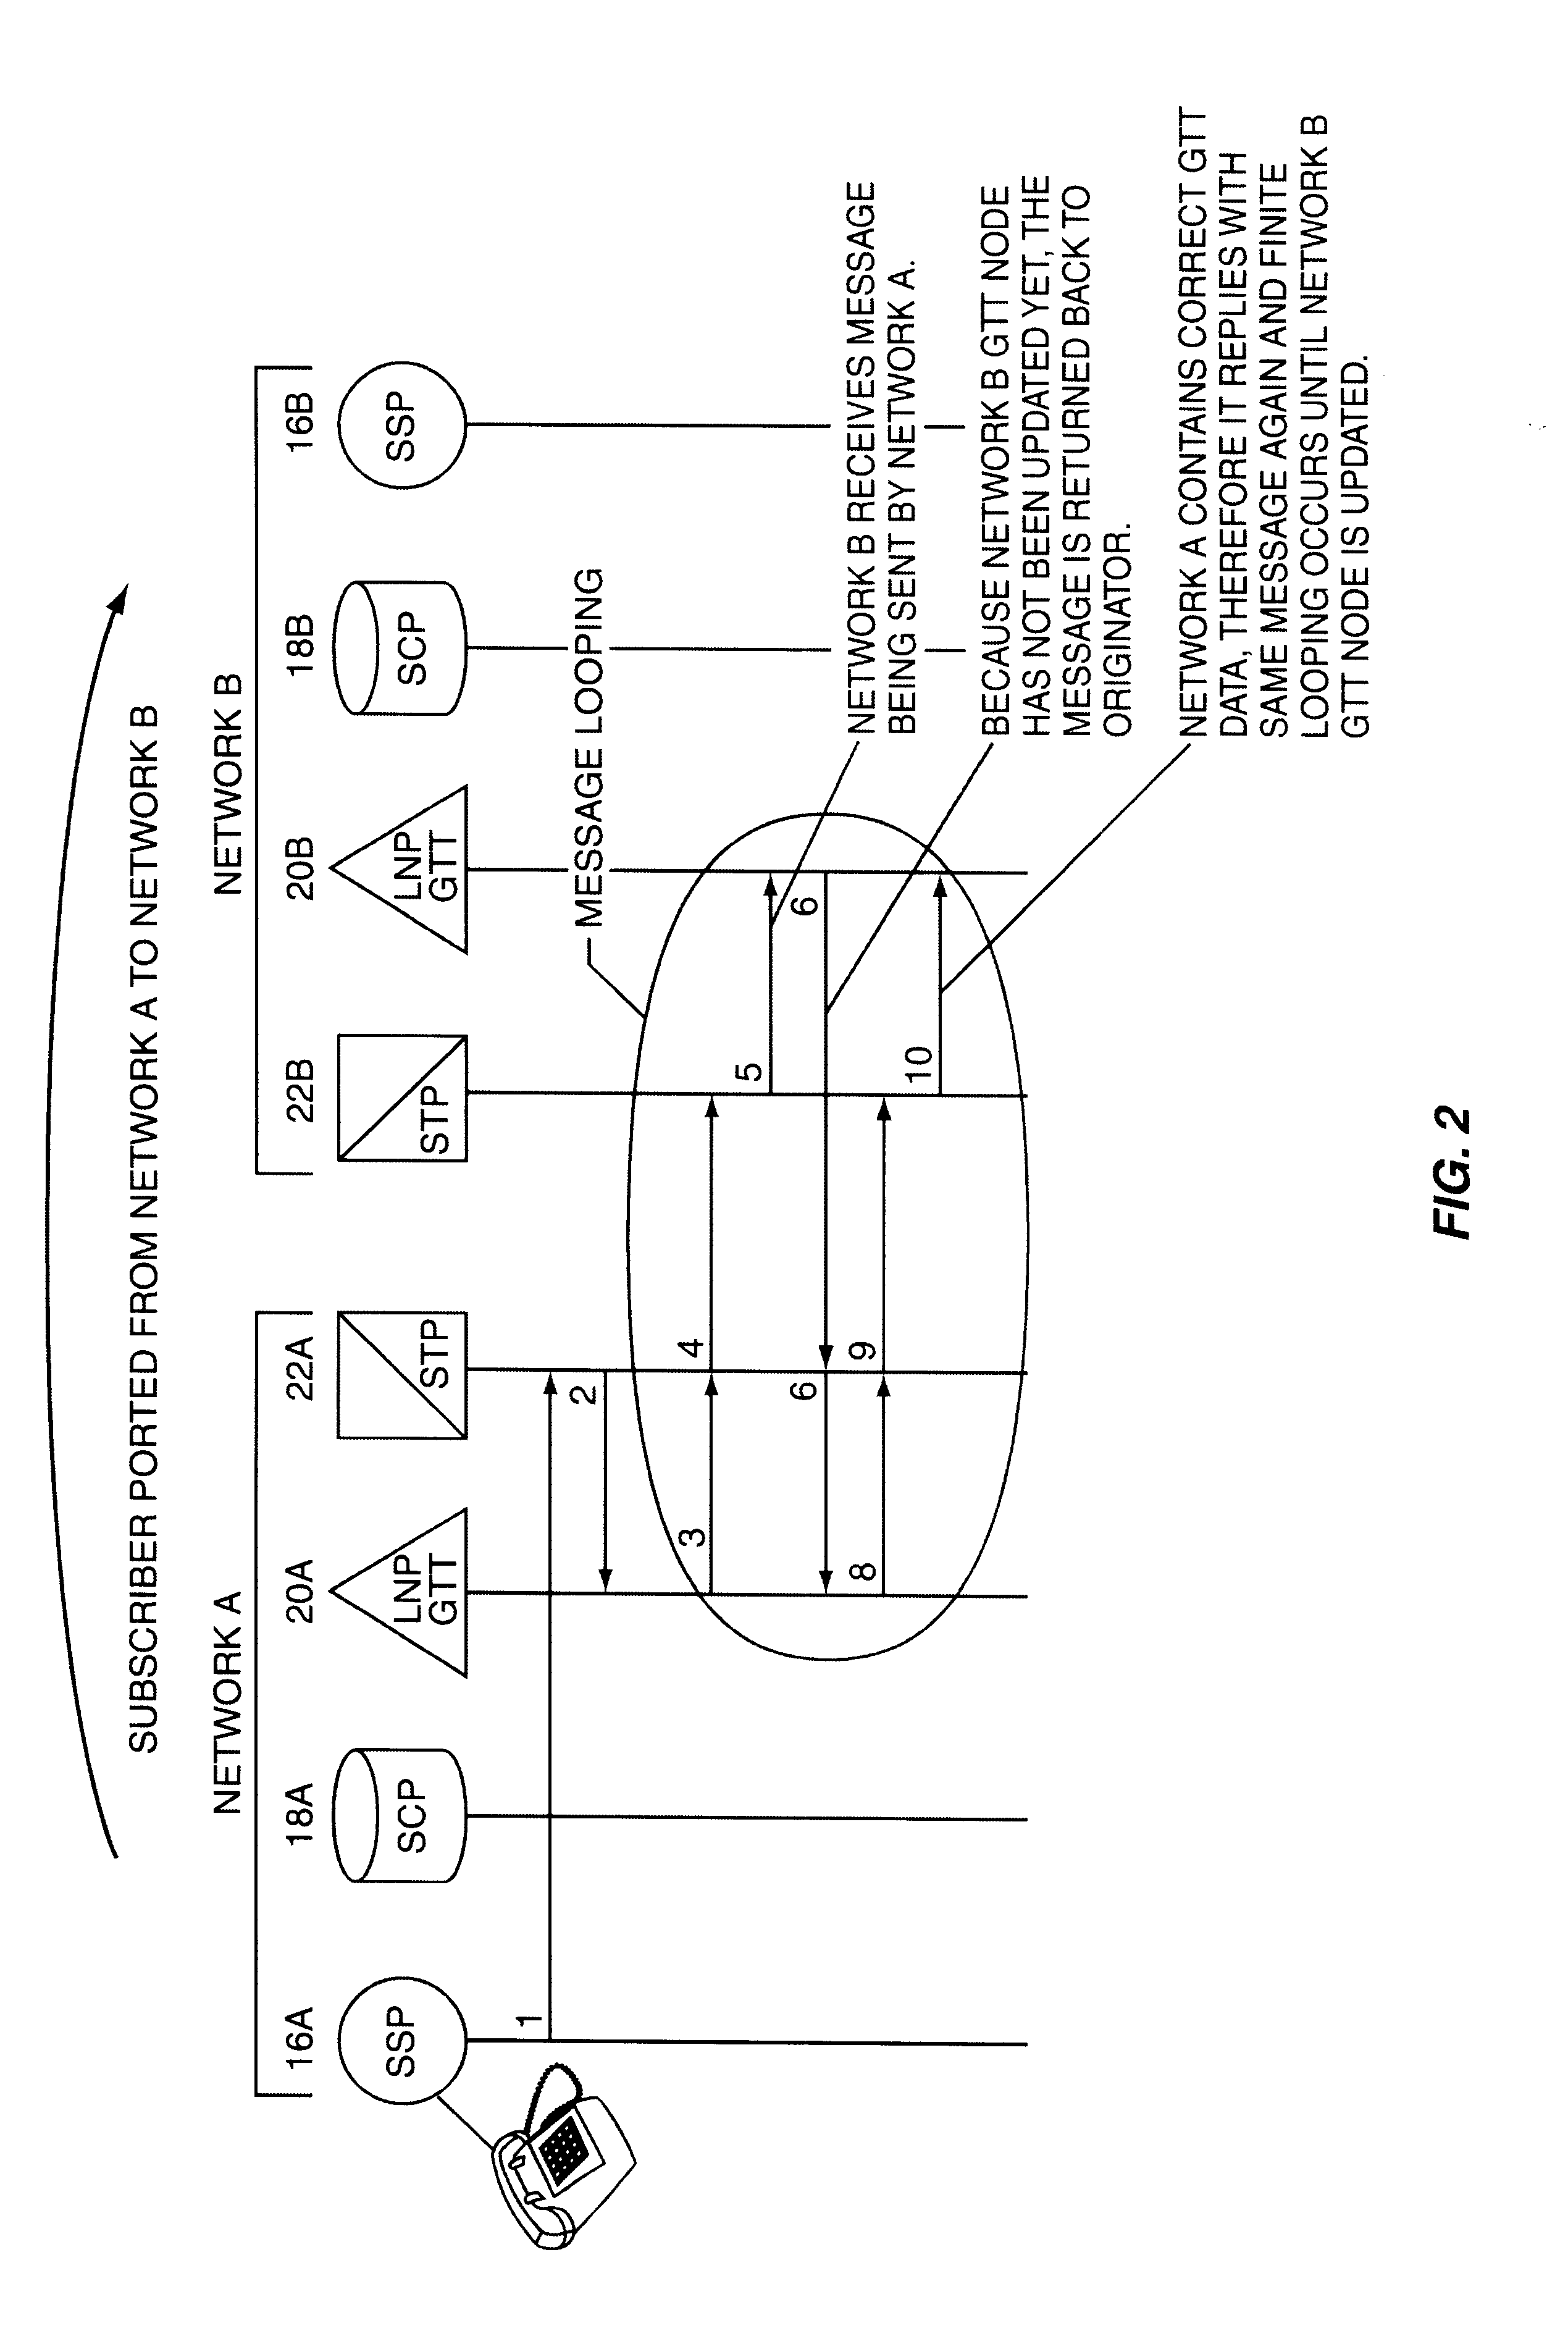 Method of provisioning nodes within a communications network